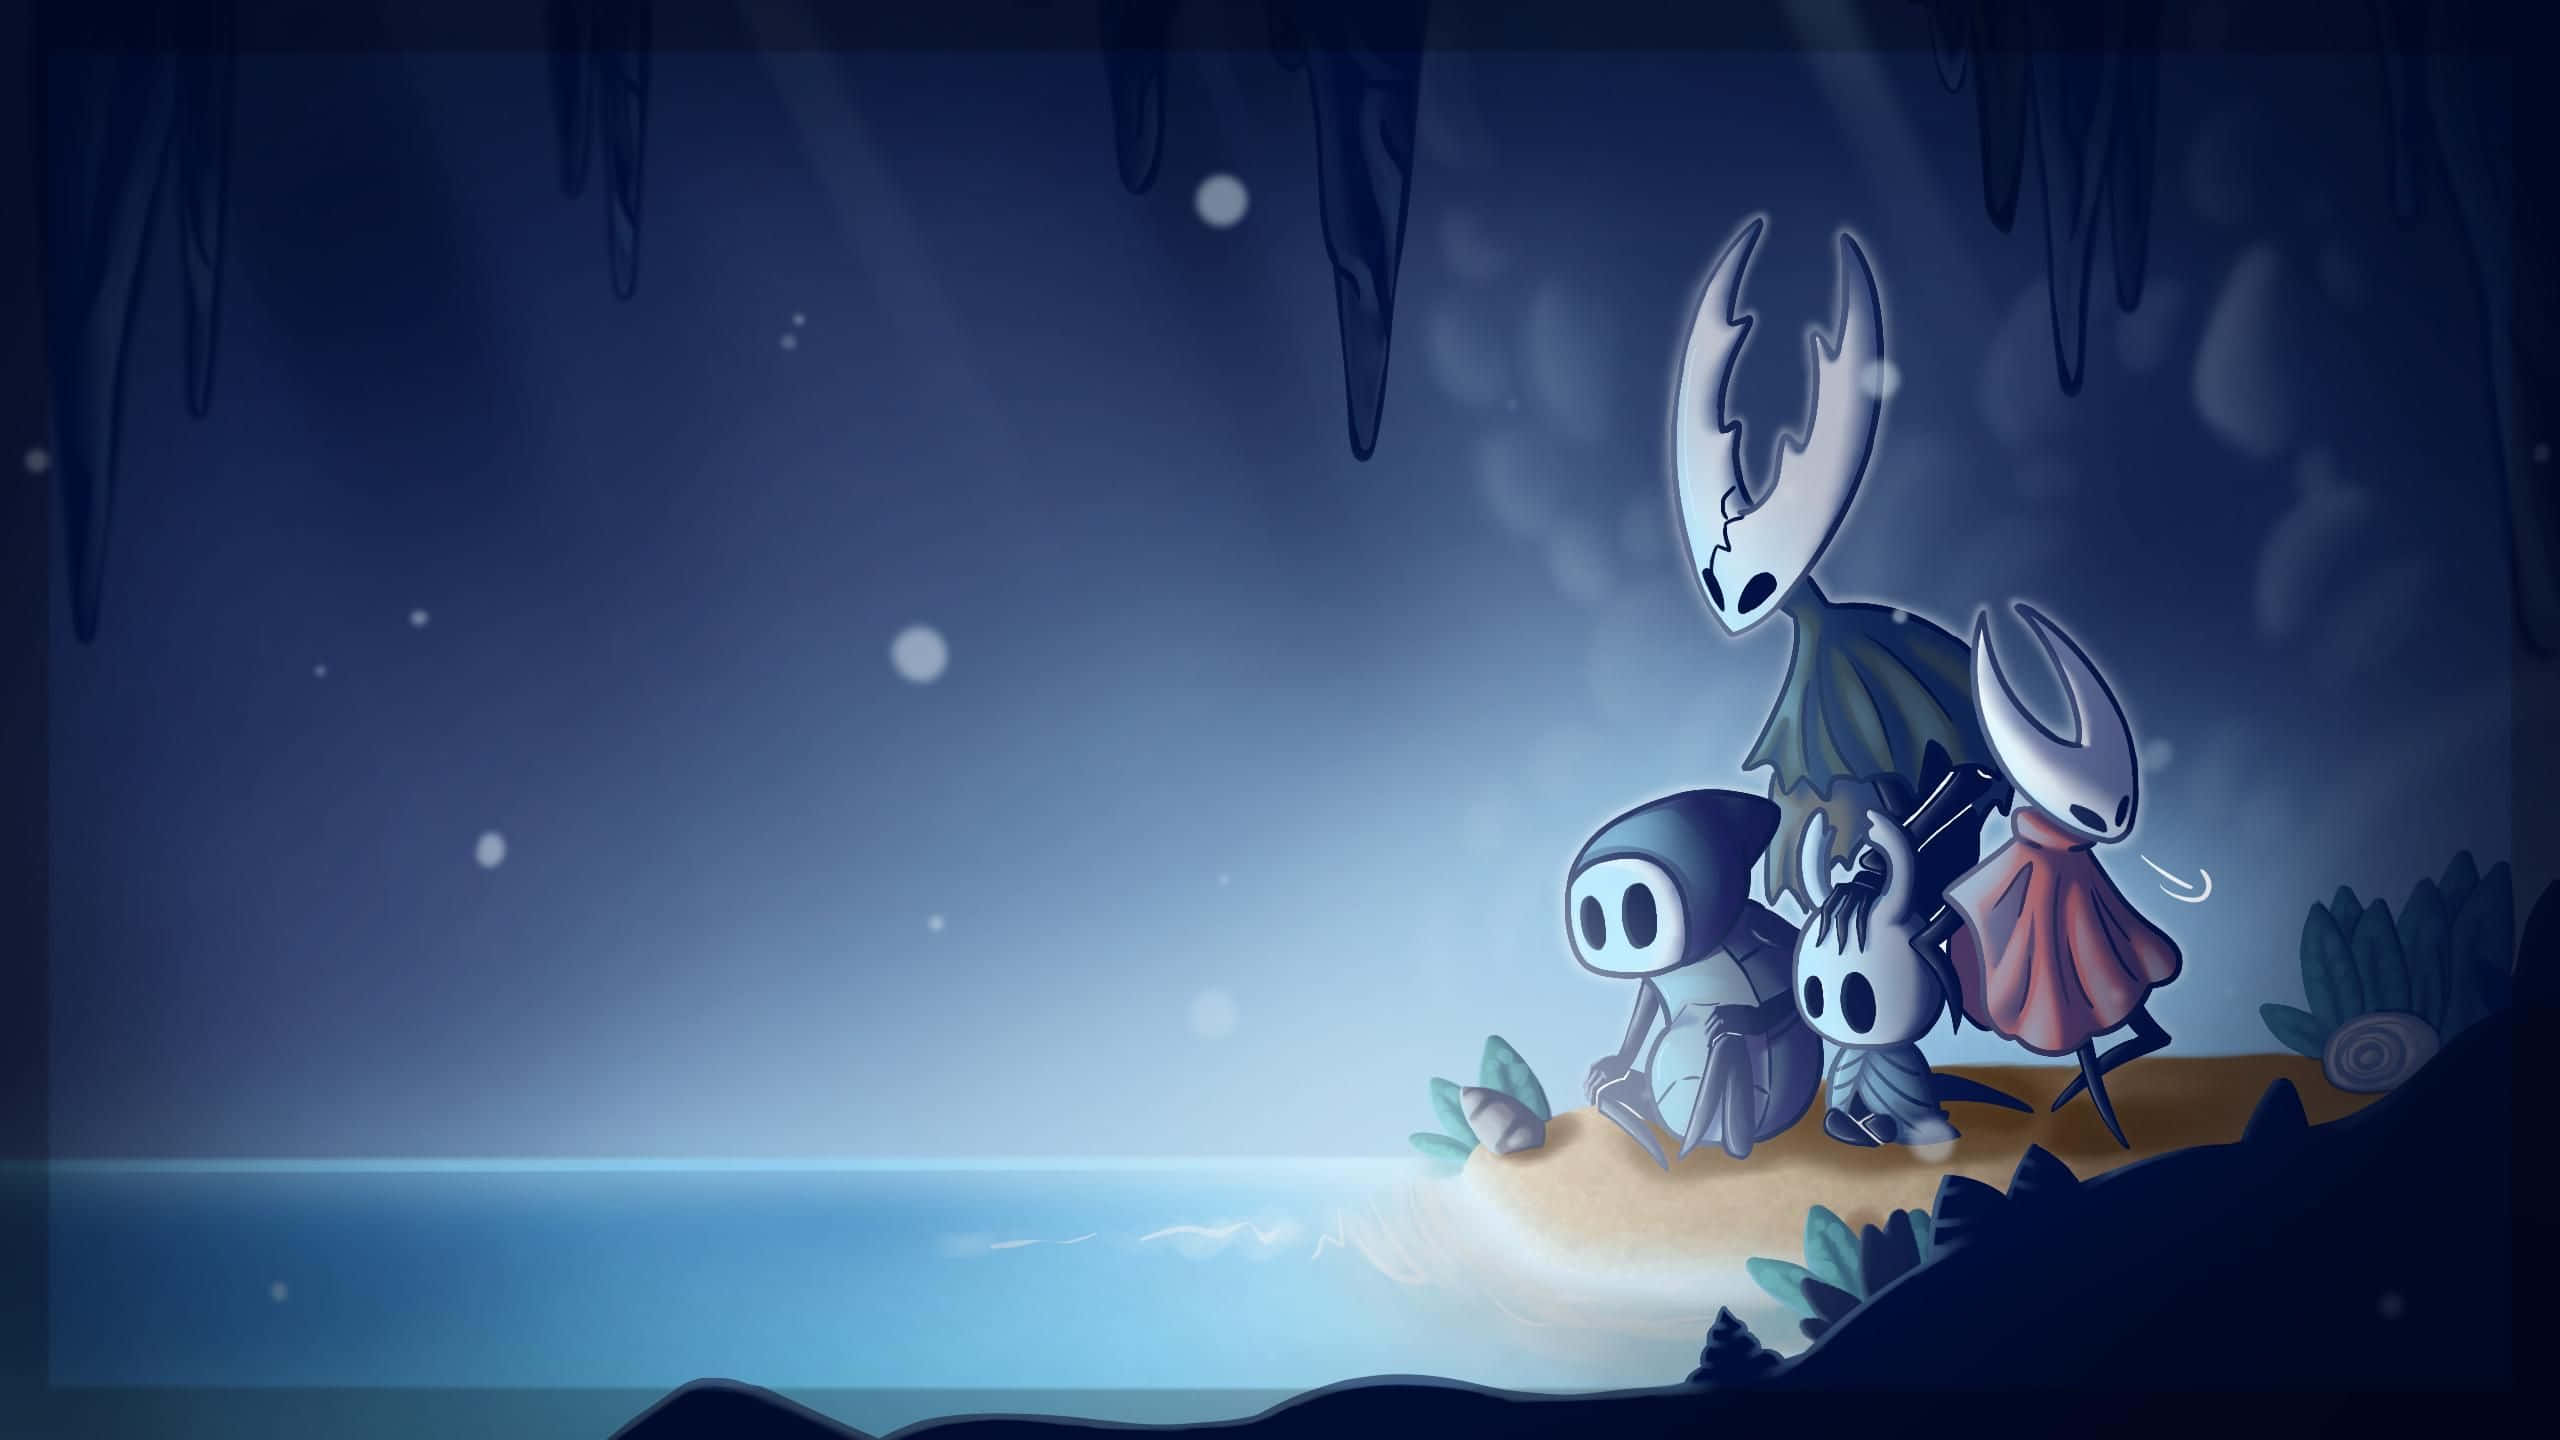 Embark on an Epic Adventure through the vast world of Hollow Knight.